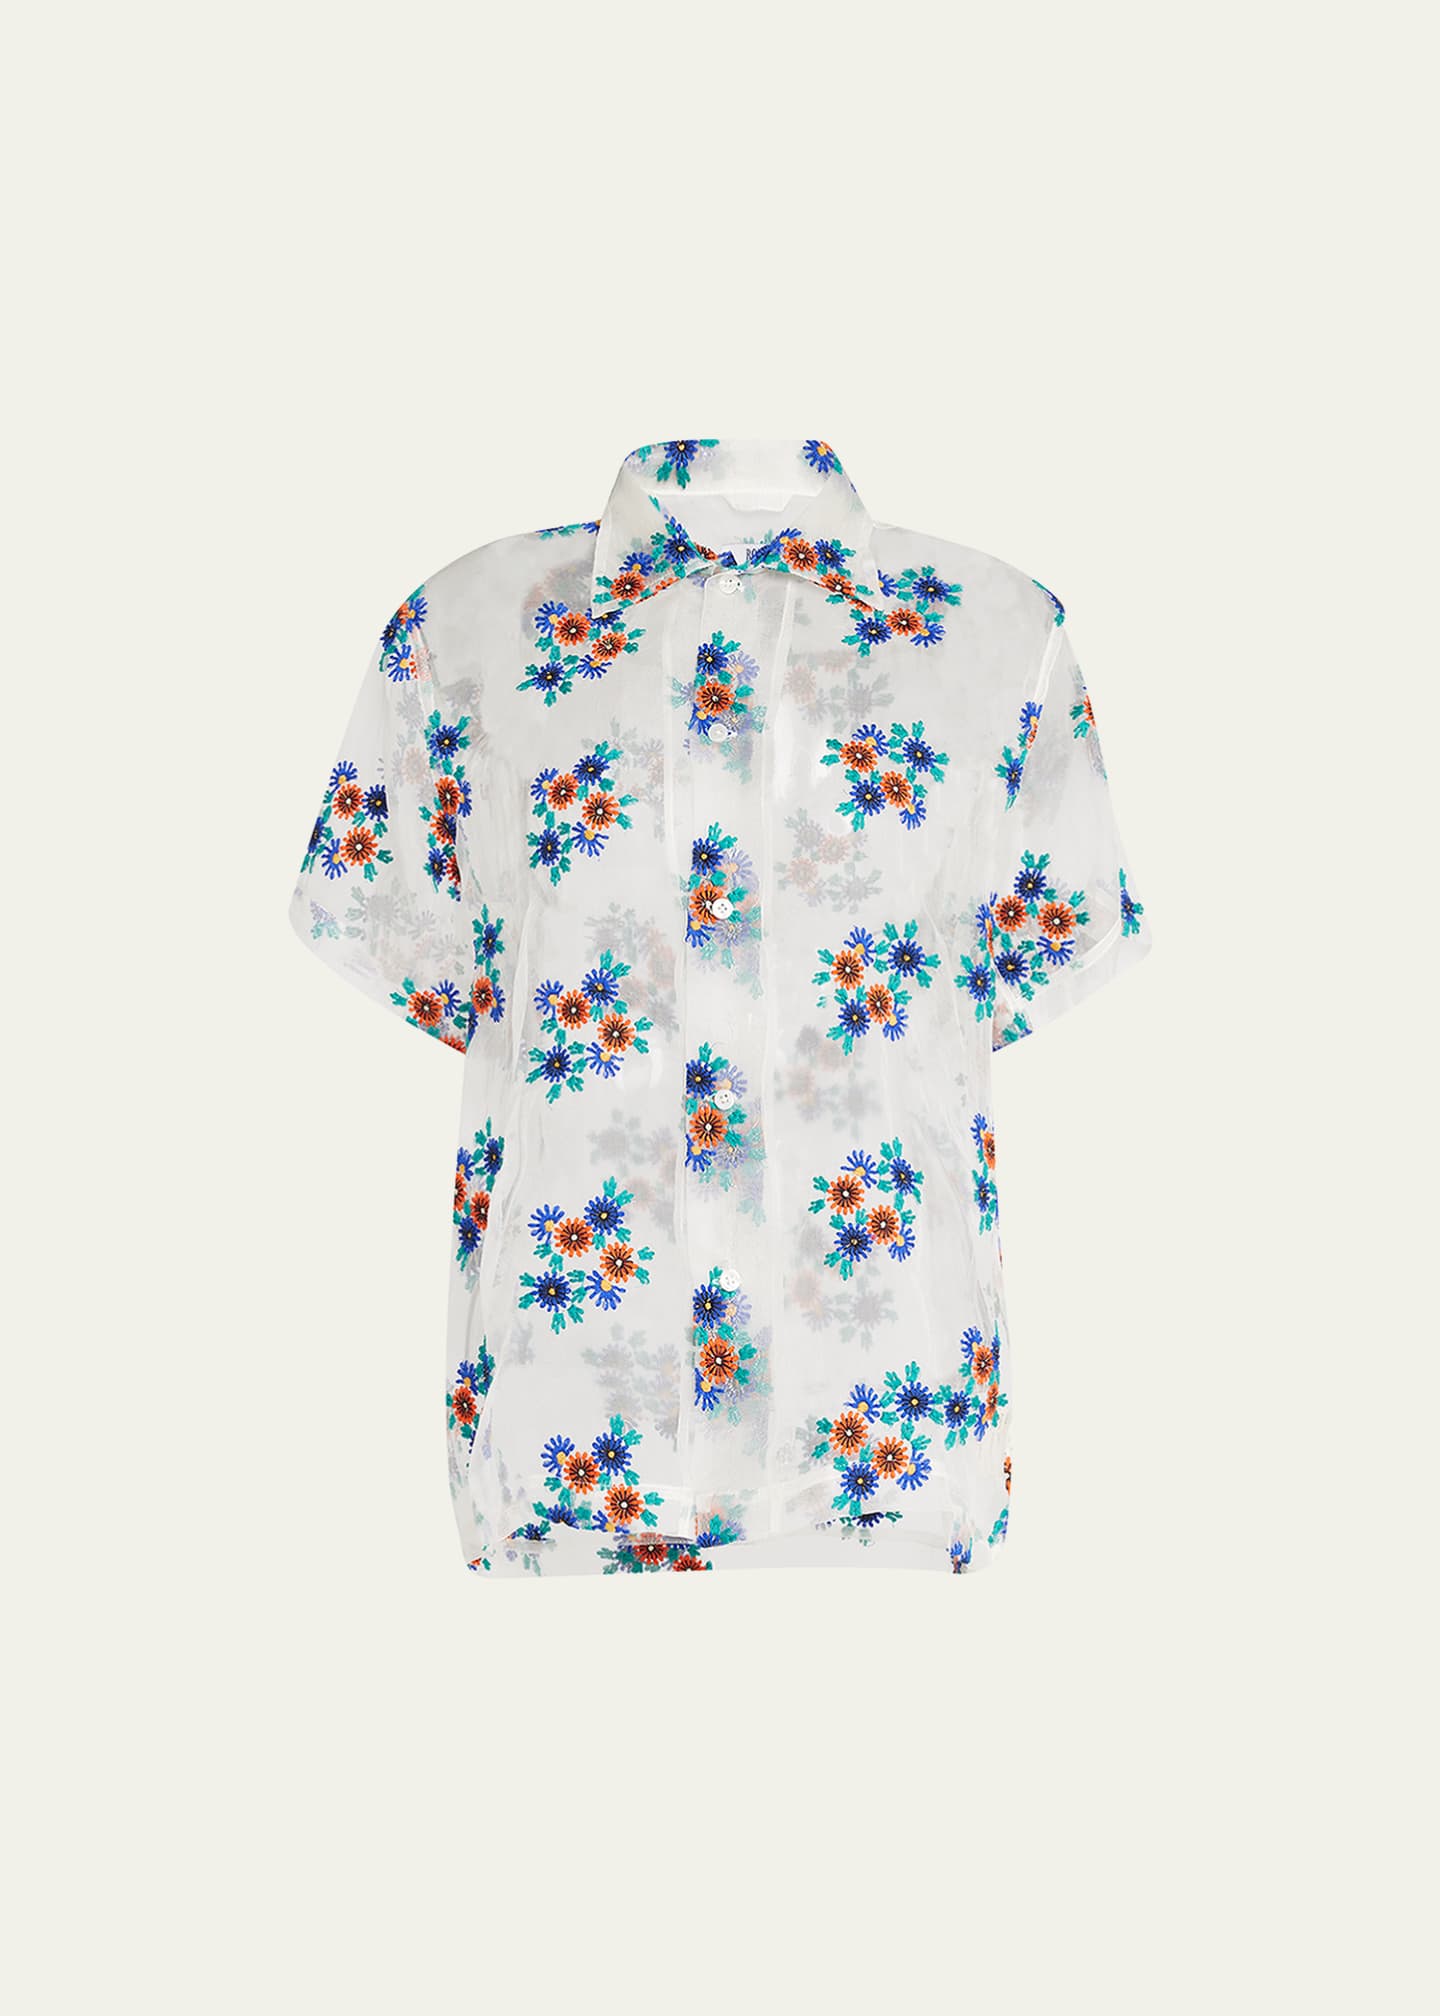 Bode White Embroidered Shirt